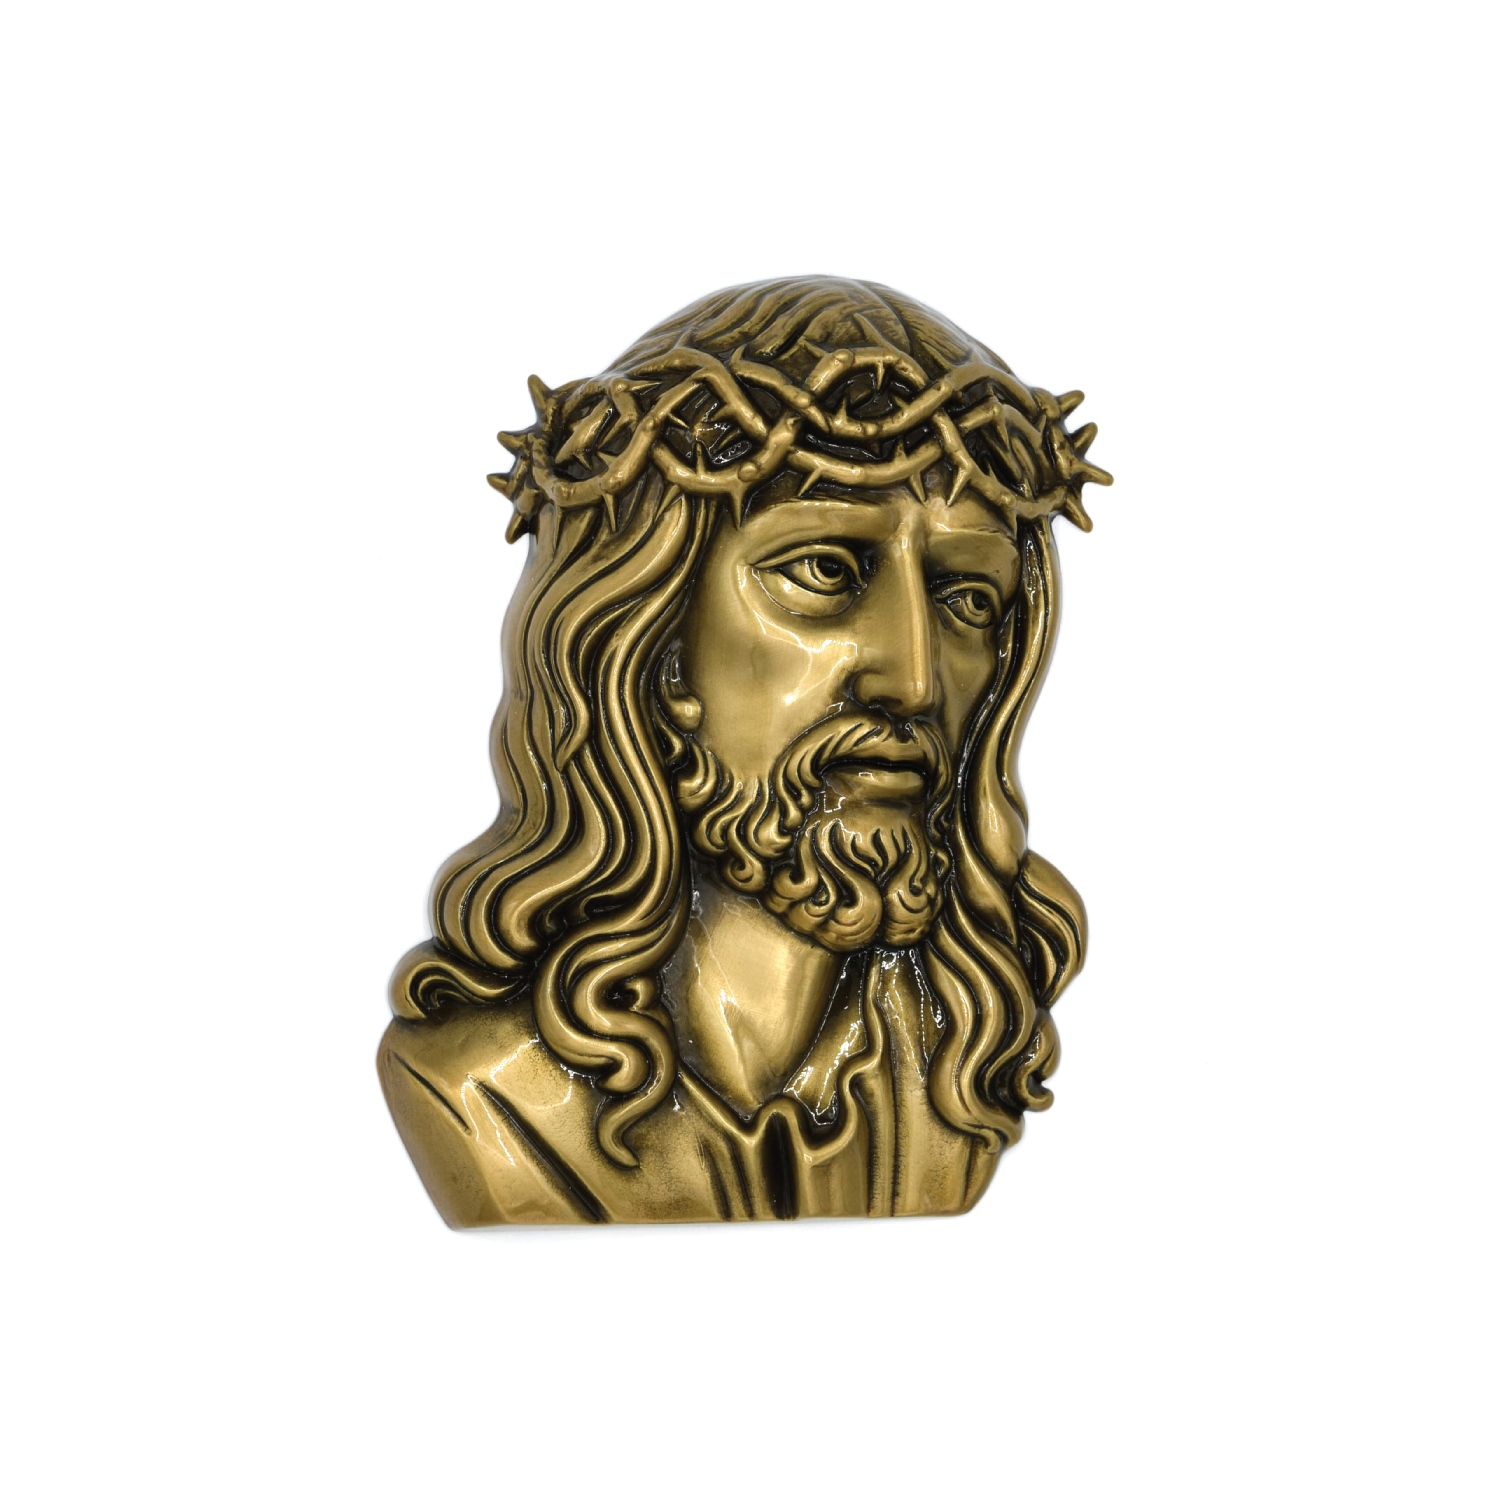 Christ with Crown of thorns 2.3″ x 3.1″